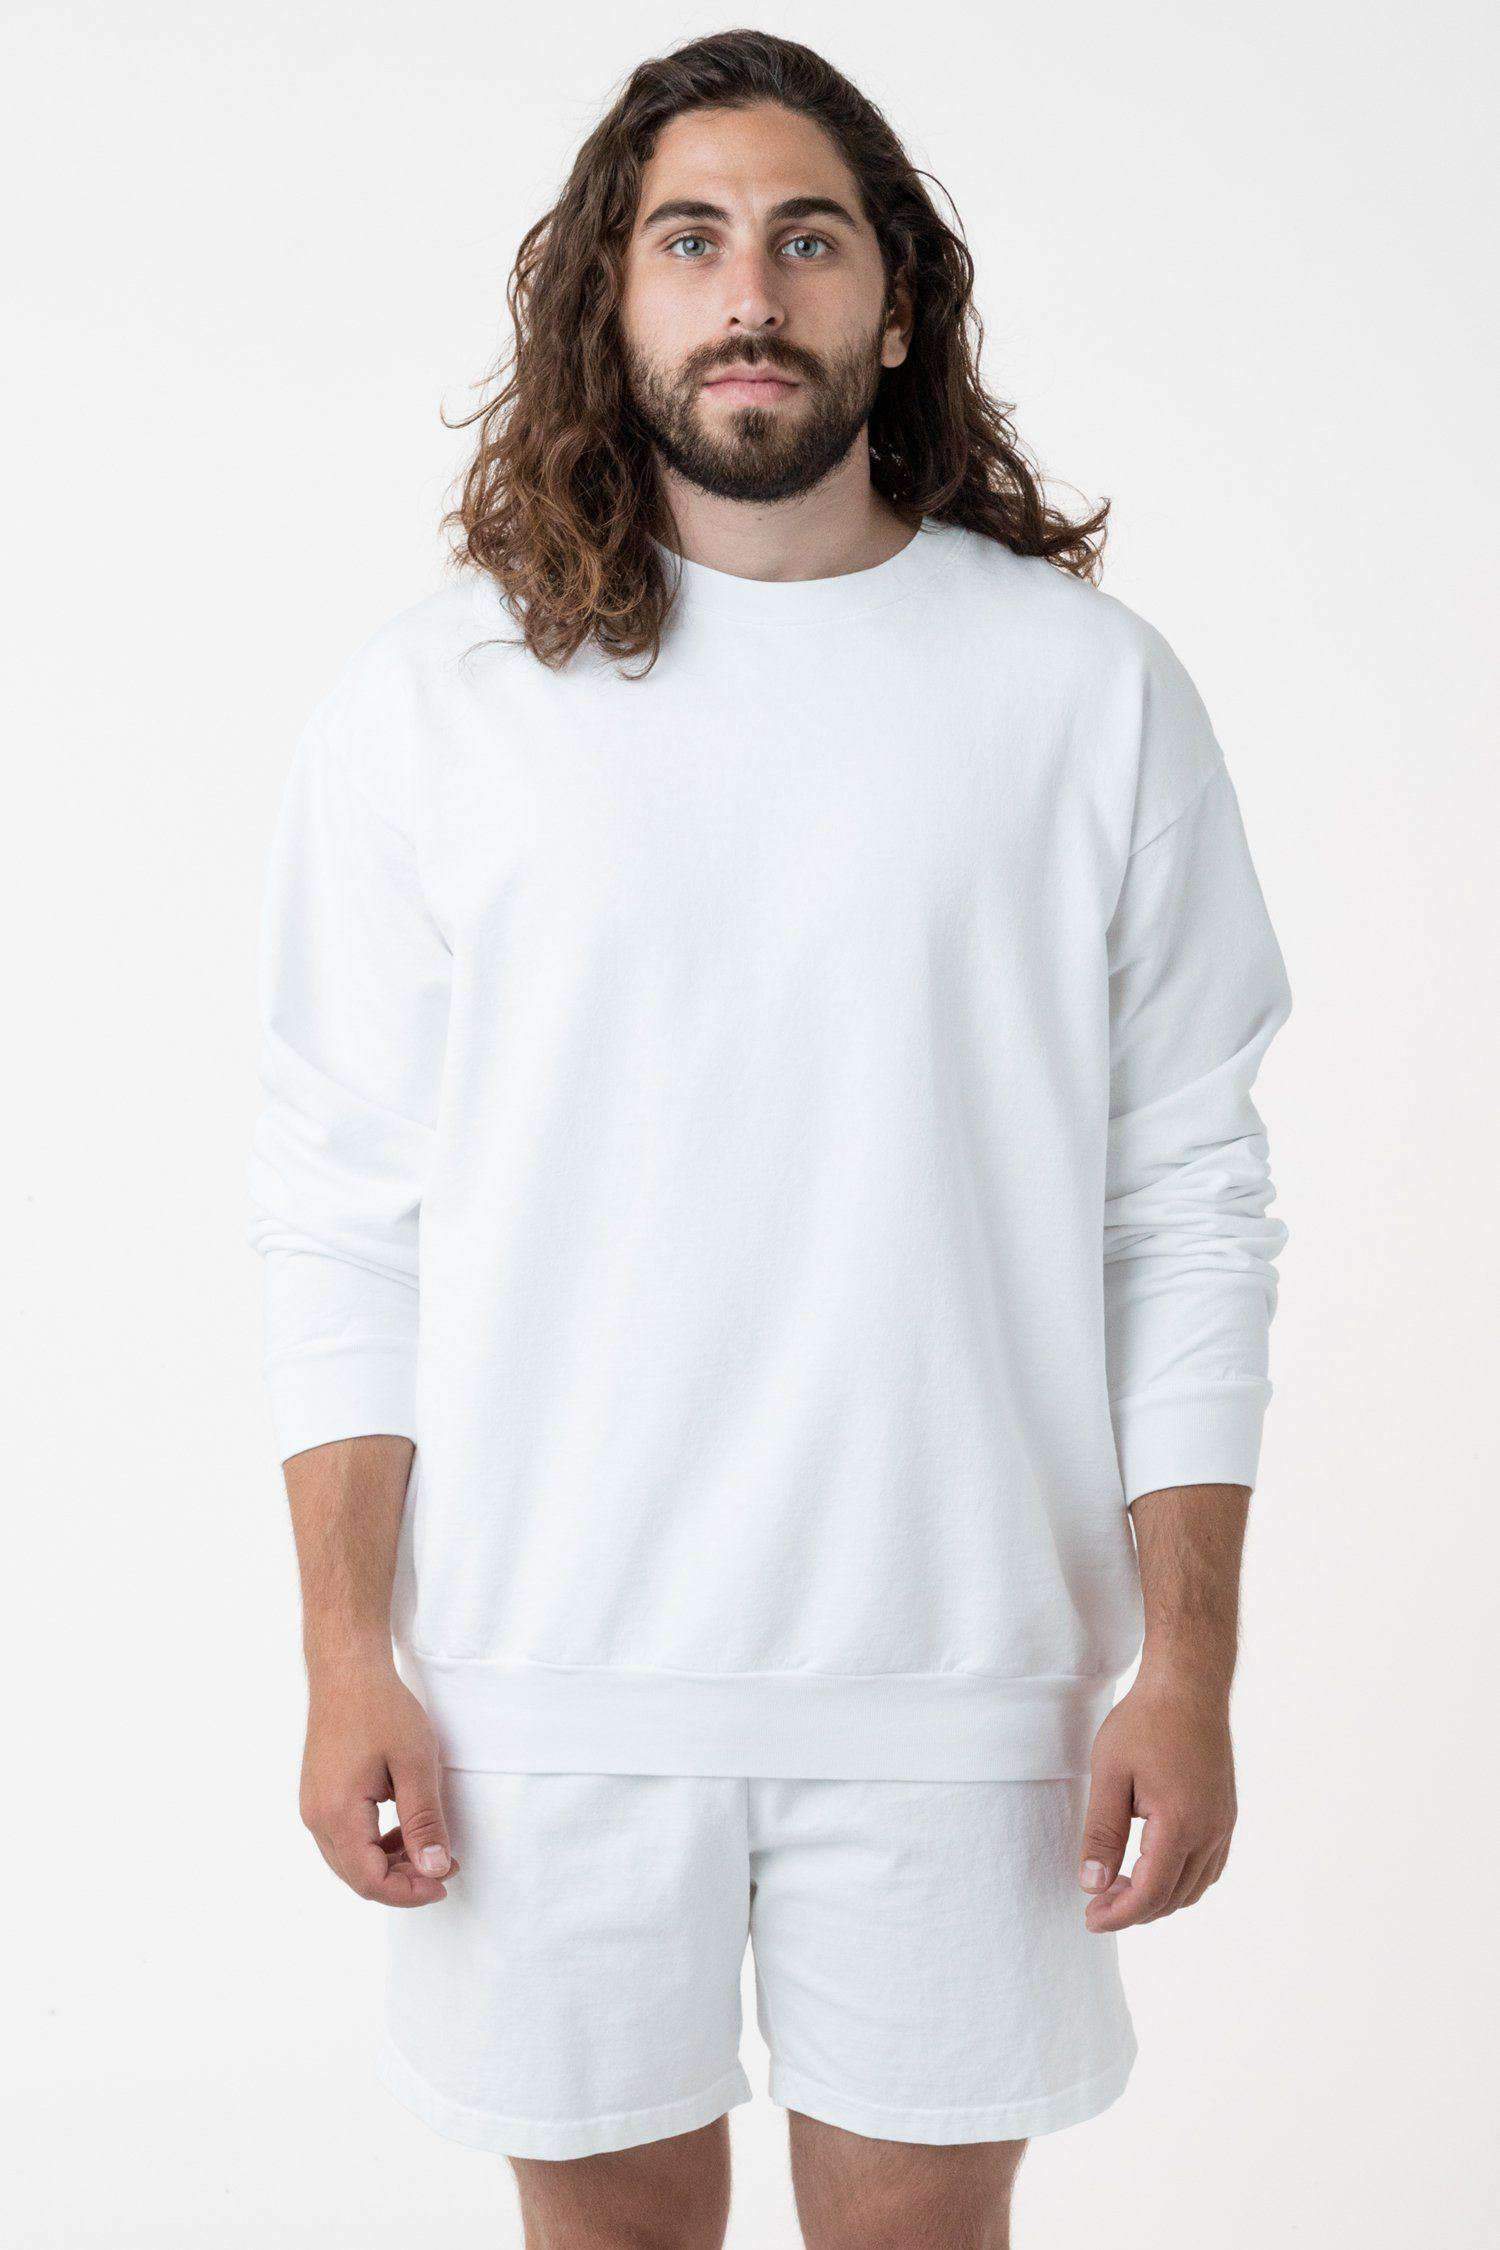 MWT07GD - Long Sleeve Garment Dye French Terry Pullover Sweatshirt Los Angeles Apparel White XS 